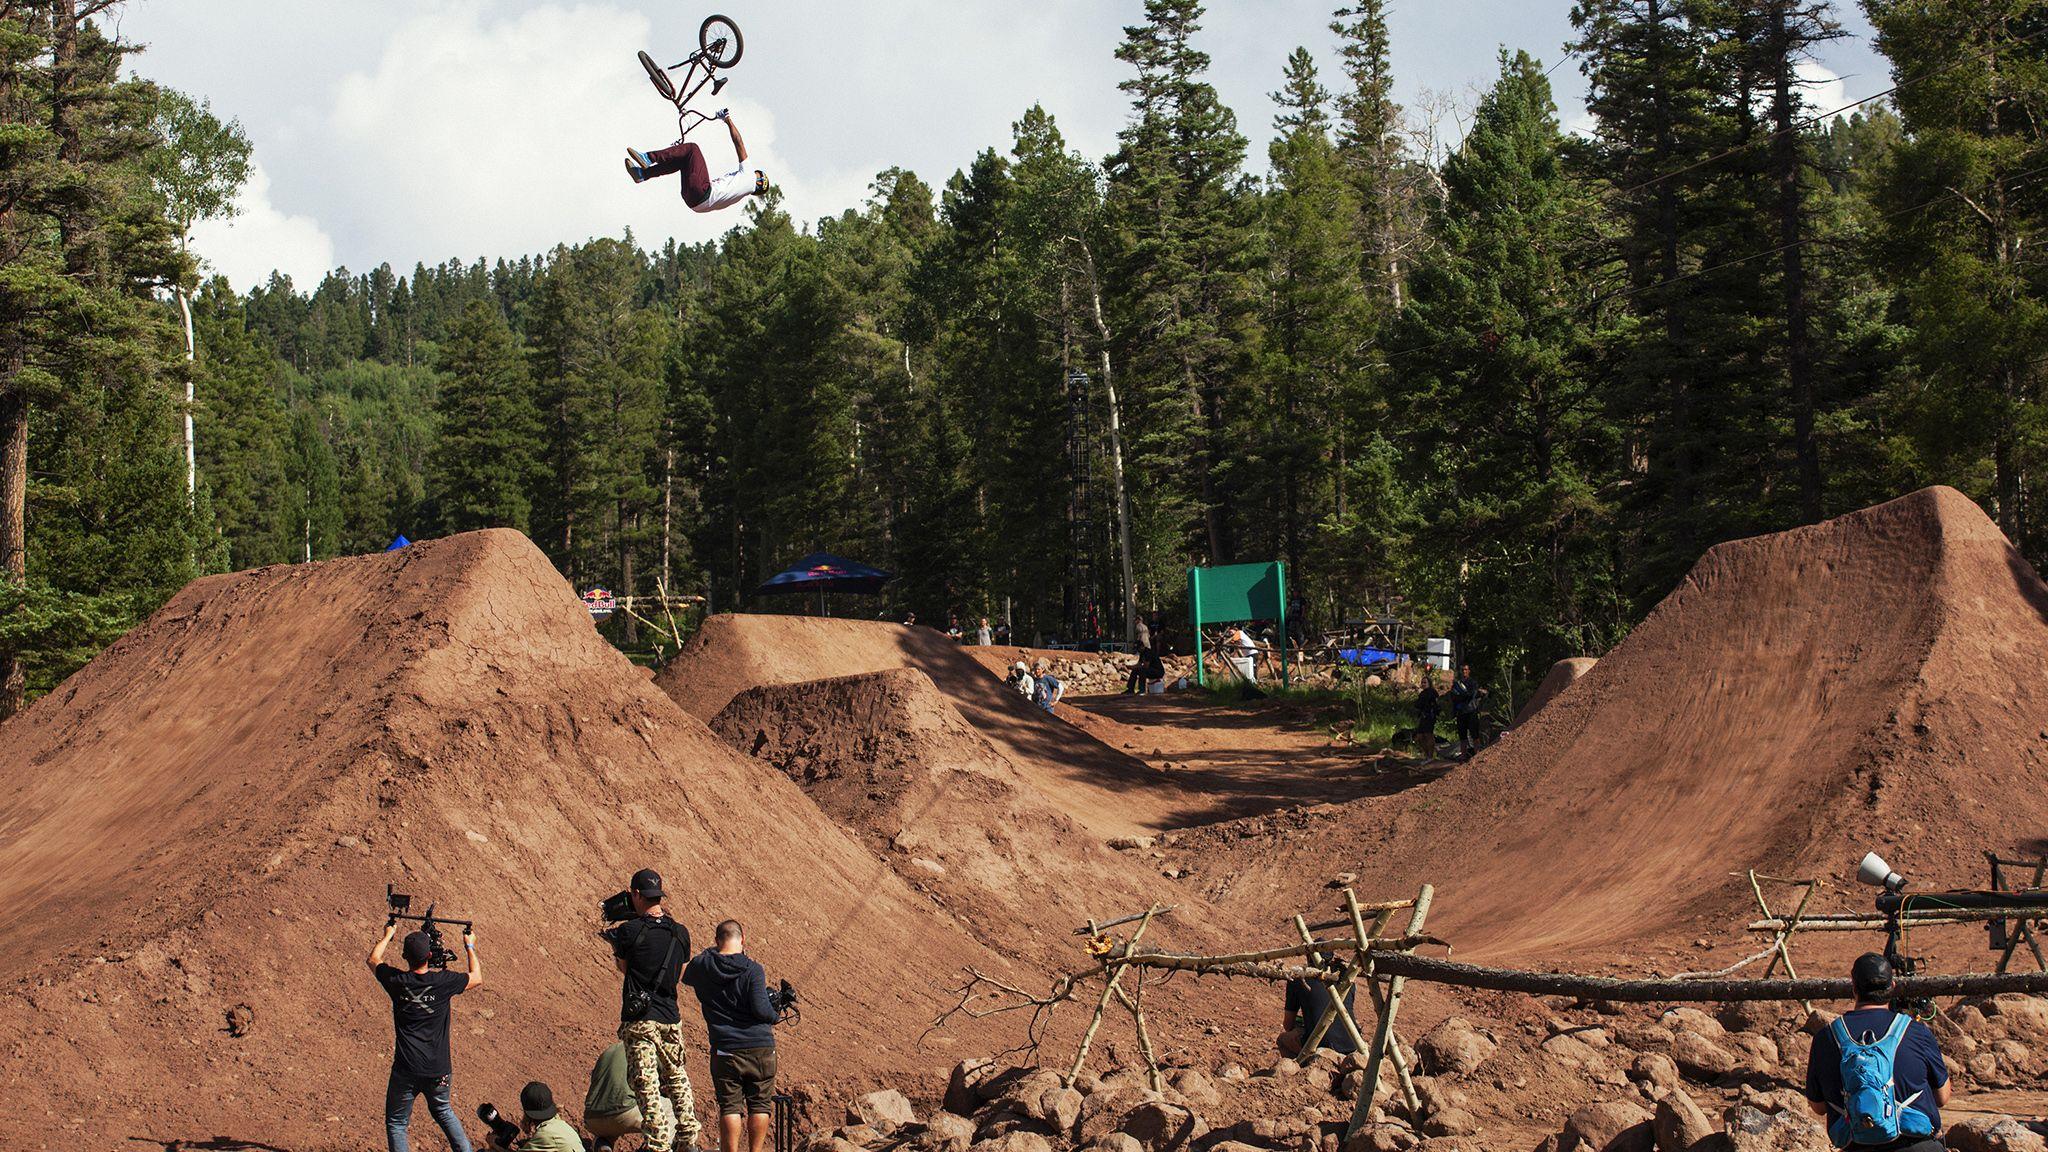 Gallery - Red Bull Dreamline 2013 BMX dirt competition